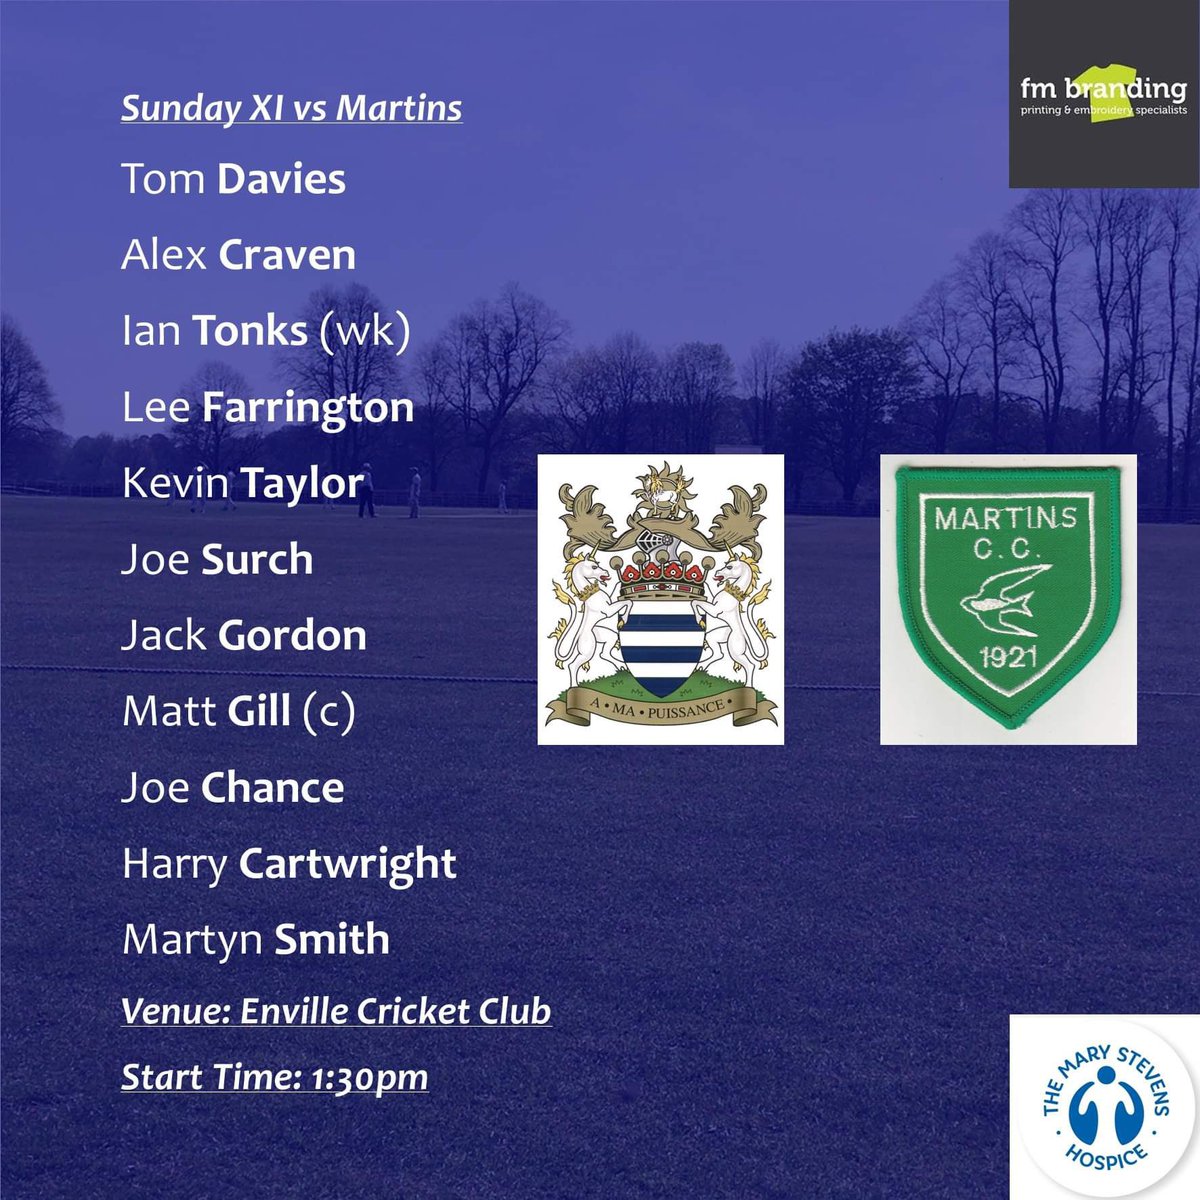 Our Sunday XI also get their season underway this weekend with a friendly against Martins. There’s a new captain this year, (@charlie93883572 🇷🇸🇷🇸🇷🇸) although he isn’t playing this week 🤨